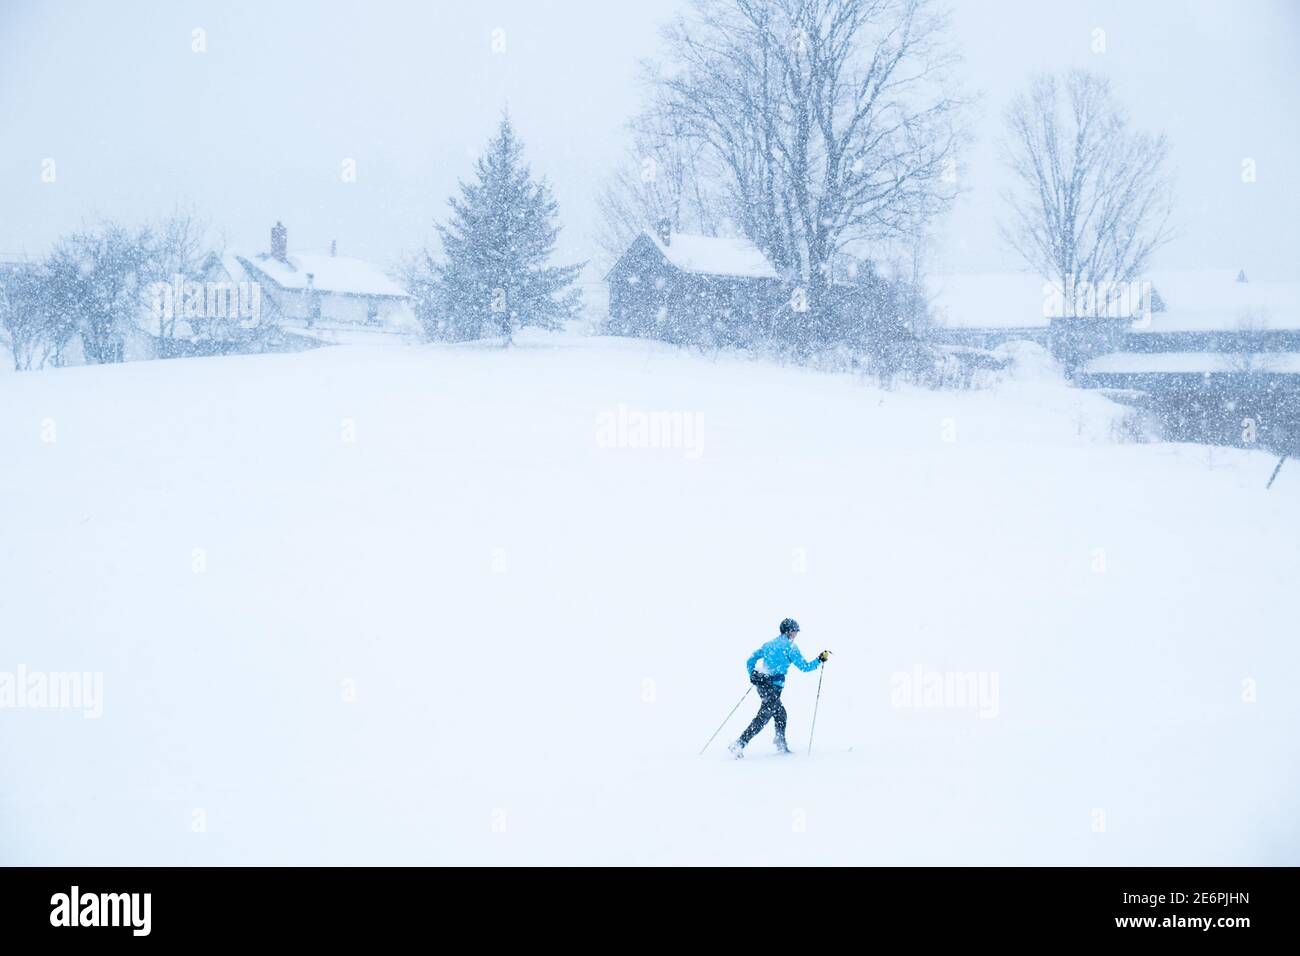 Cross country skiing in new snow, East Montpelier, VT, USA. Stock Photo